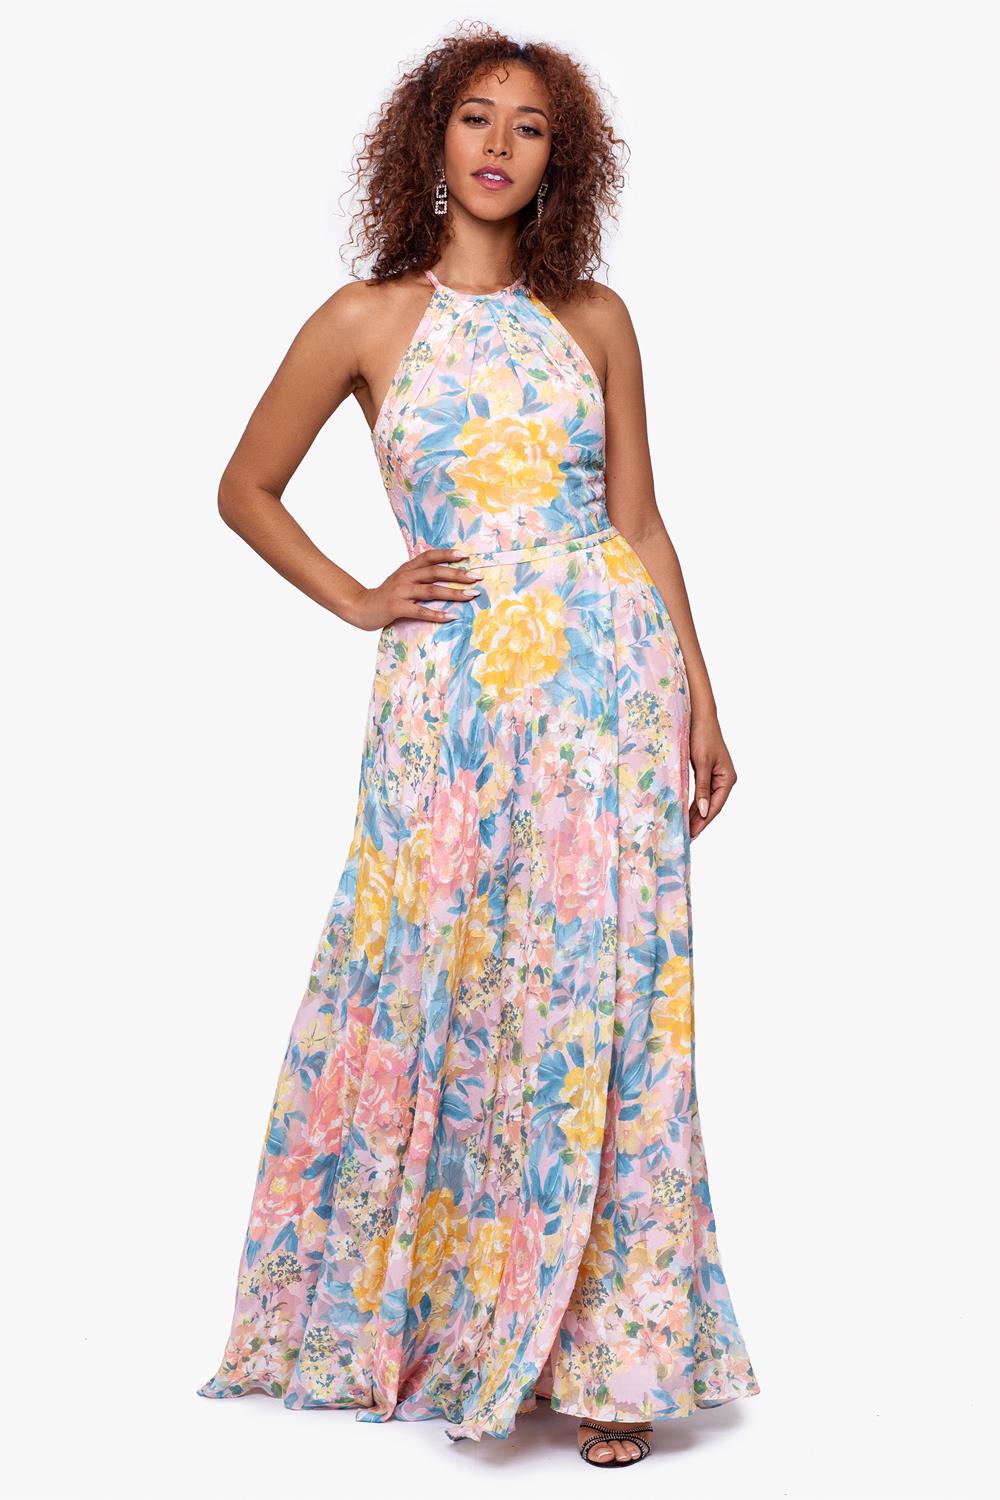 All Womens – Lord & Taylor